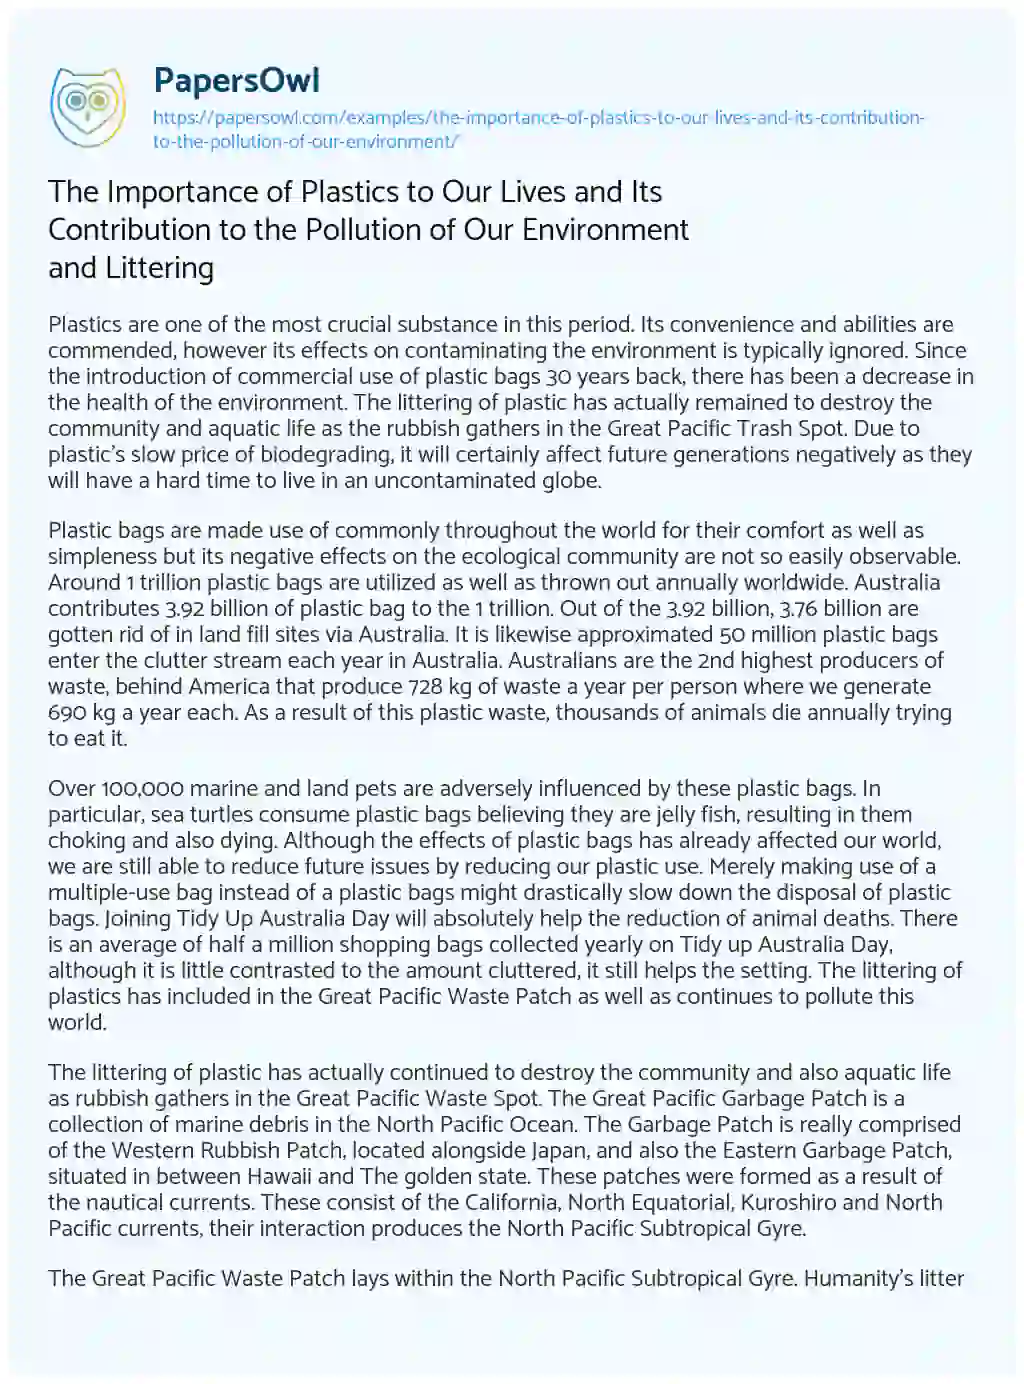 Essay on The Importance of Plastics to our Lives and its Contribution to the Pollution of our Environment and Littering